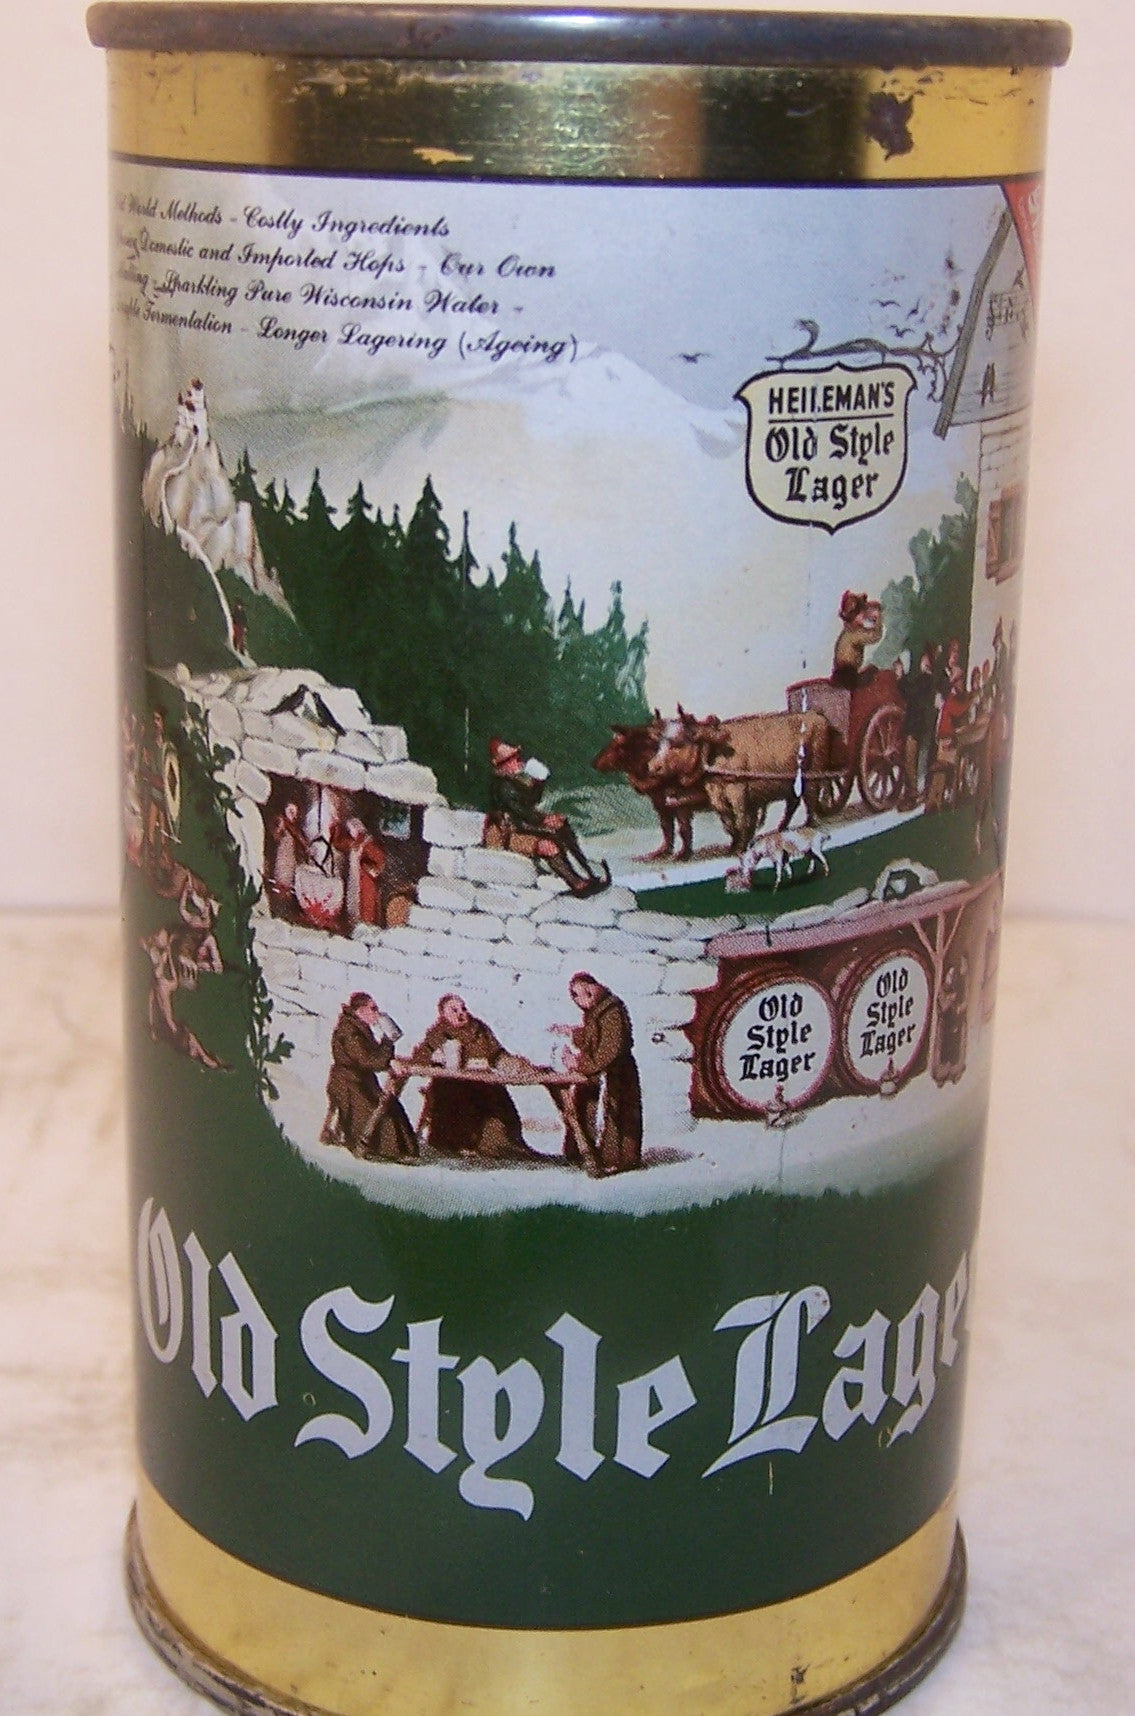 Old Style Lager Beer, USBC 108-9, Grade 1 Sold on 05/05/16